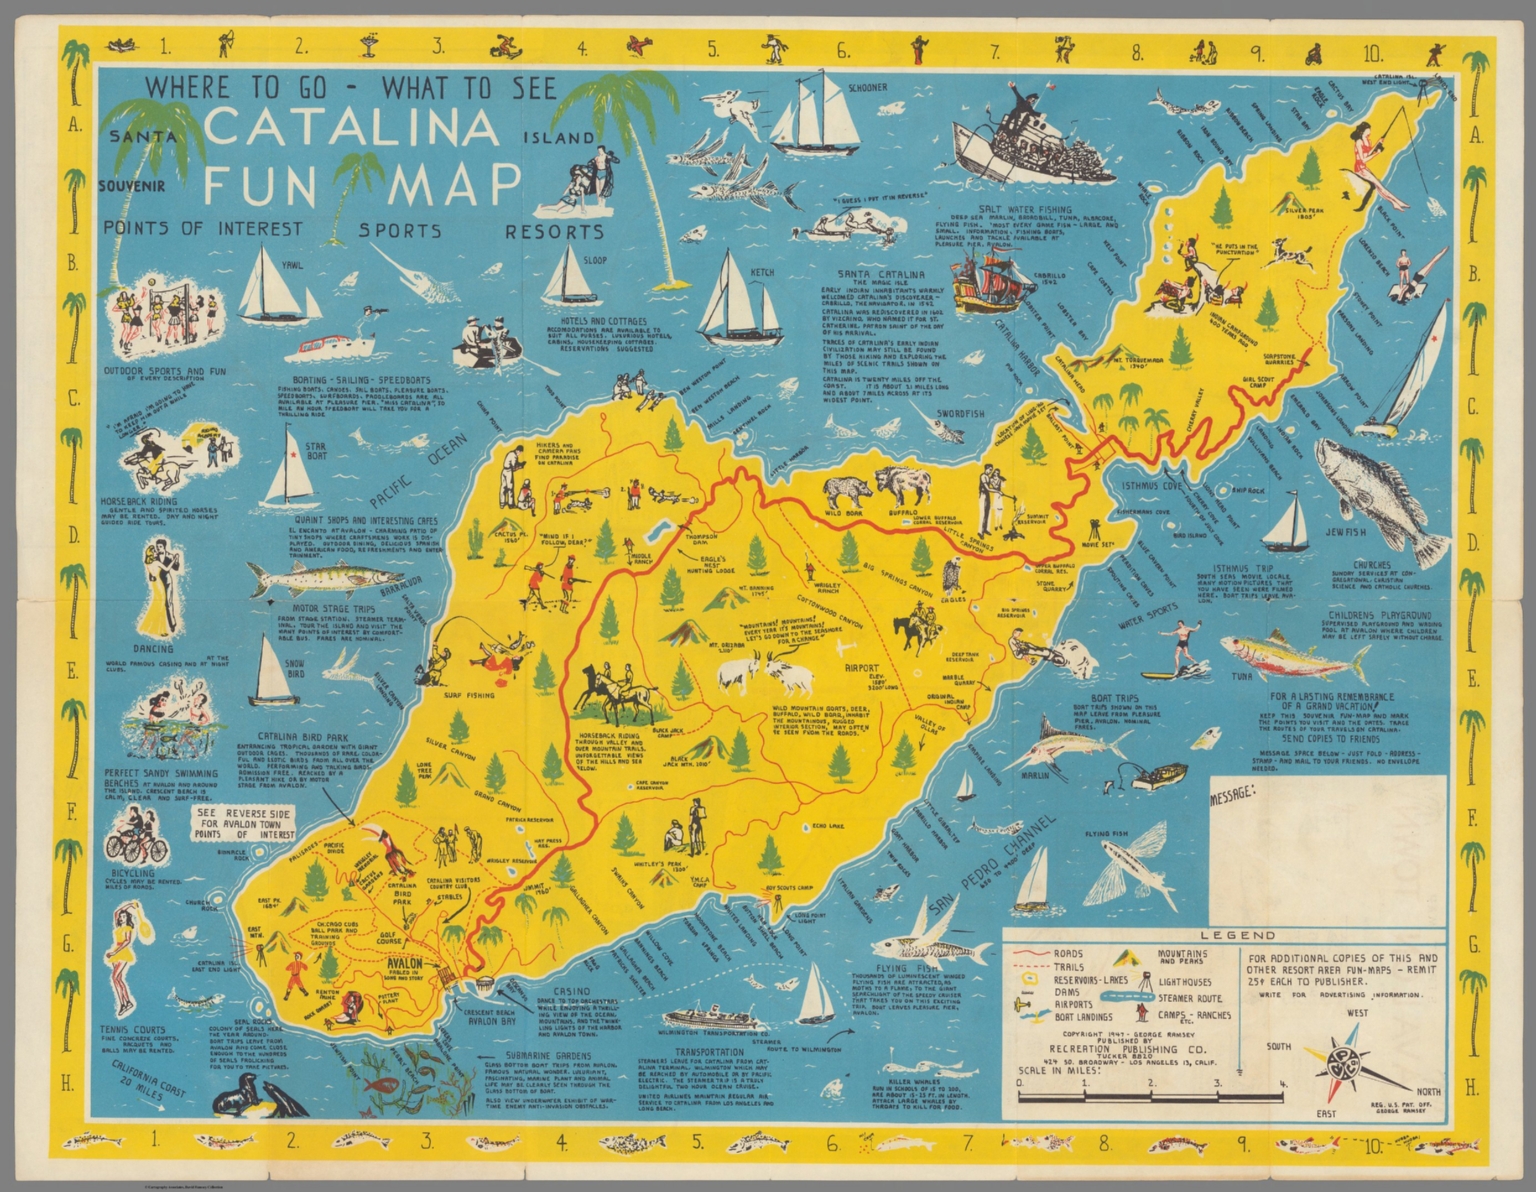 Where to go - What to see Santa Catalina Island fun map - David Rumsey ...